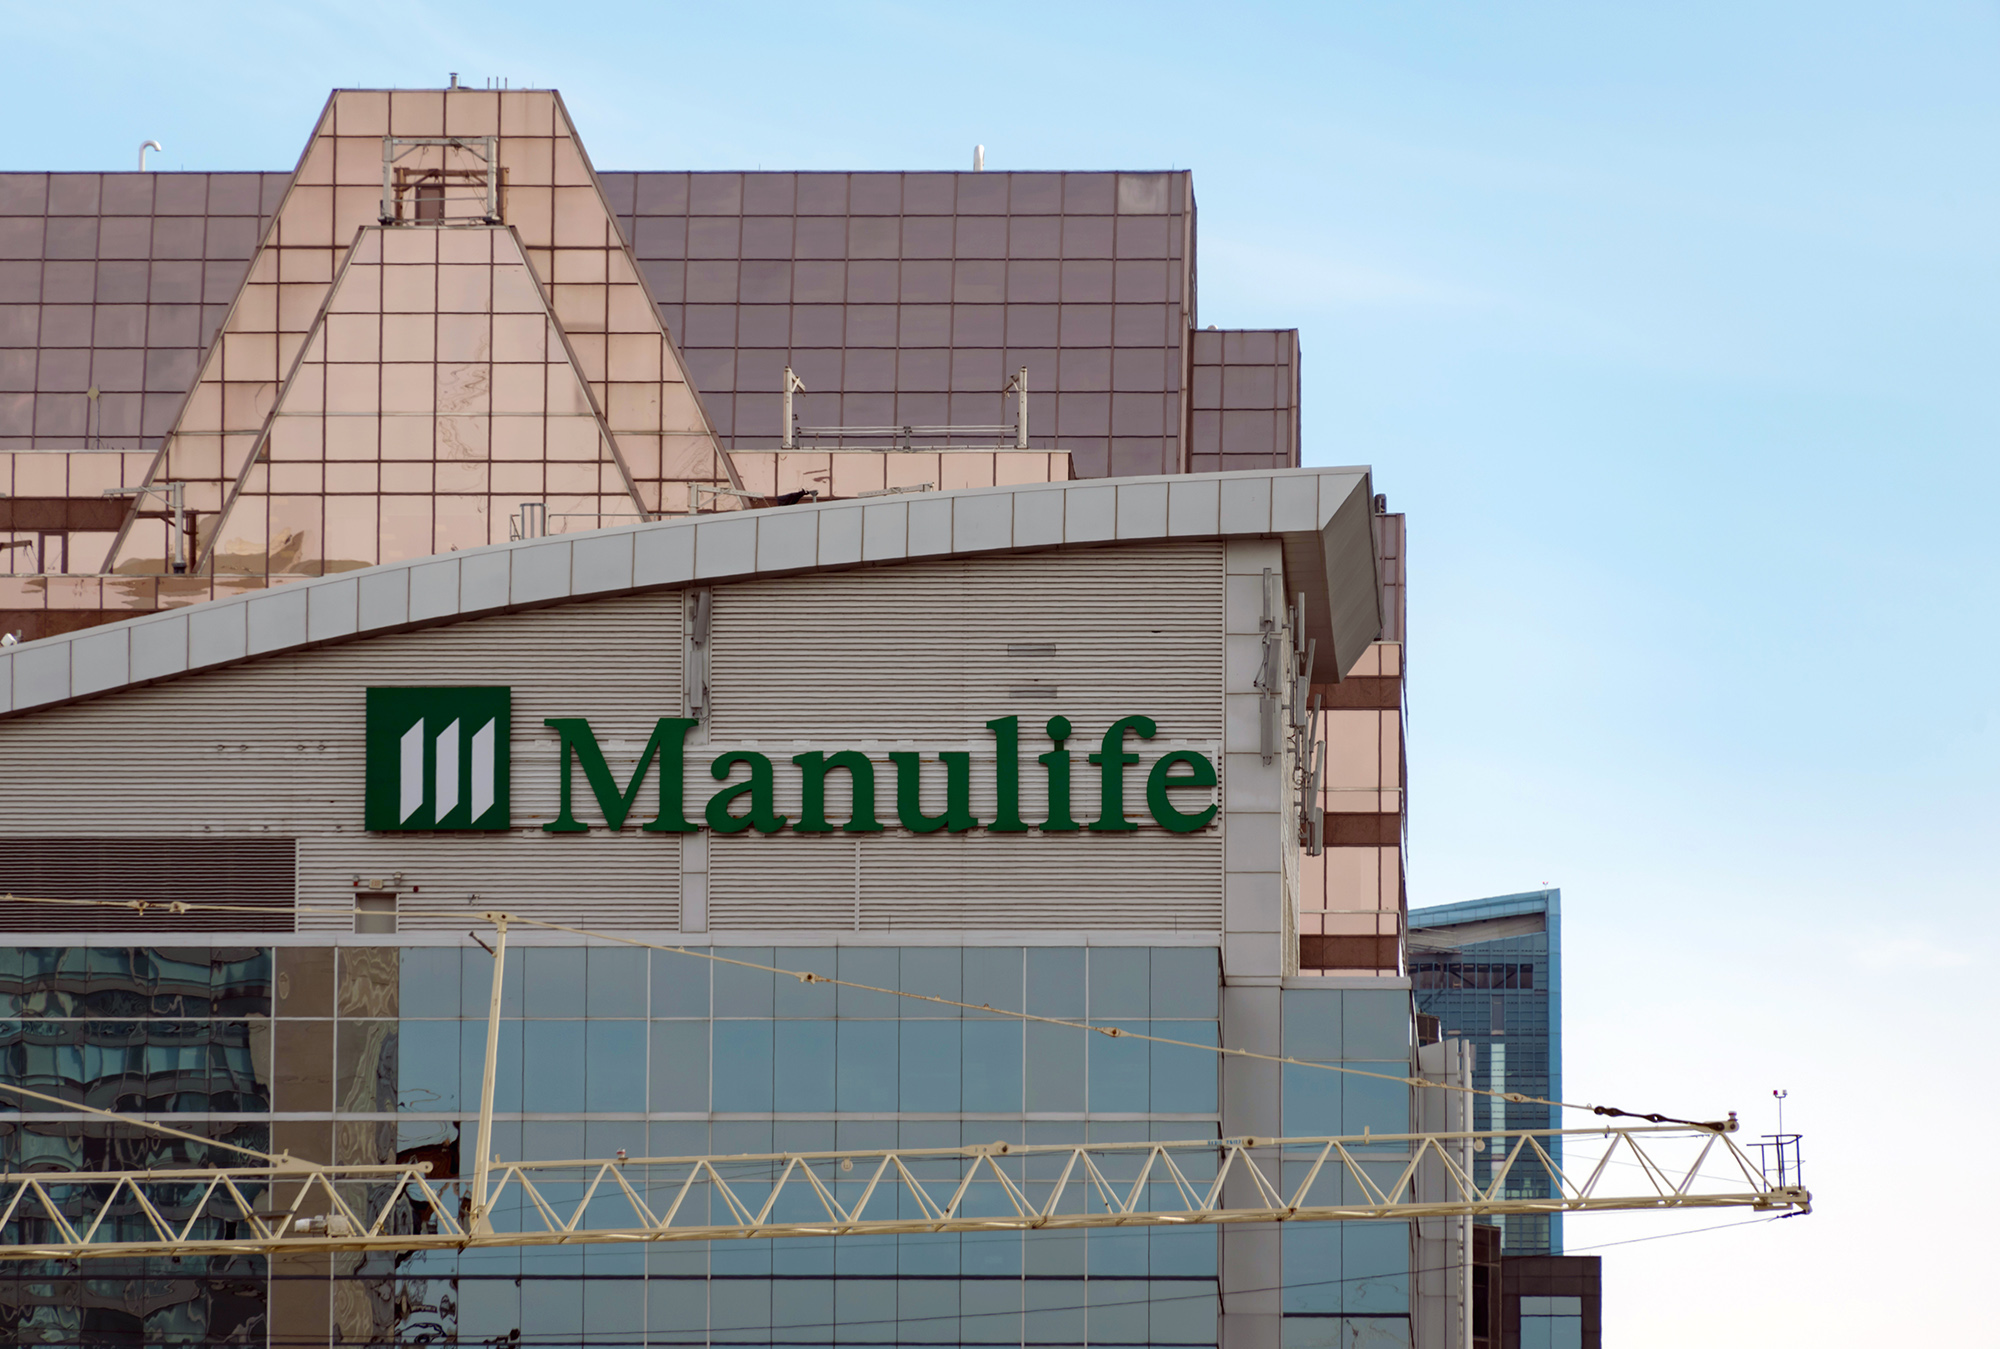 Manulife said to be bidding for full control of China funds JV, lured by US$3.8 trillion market. (Photo by Bloomberg)